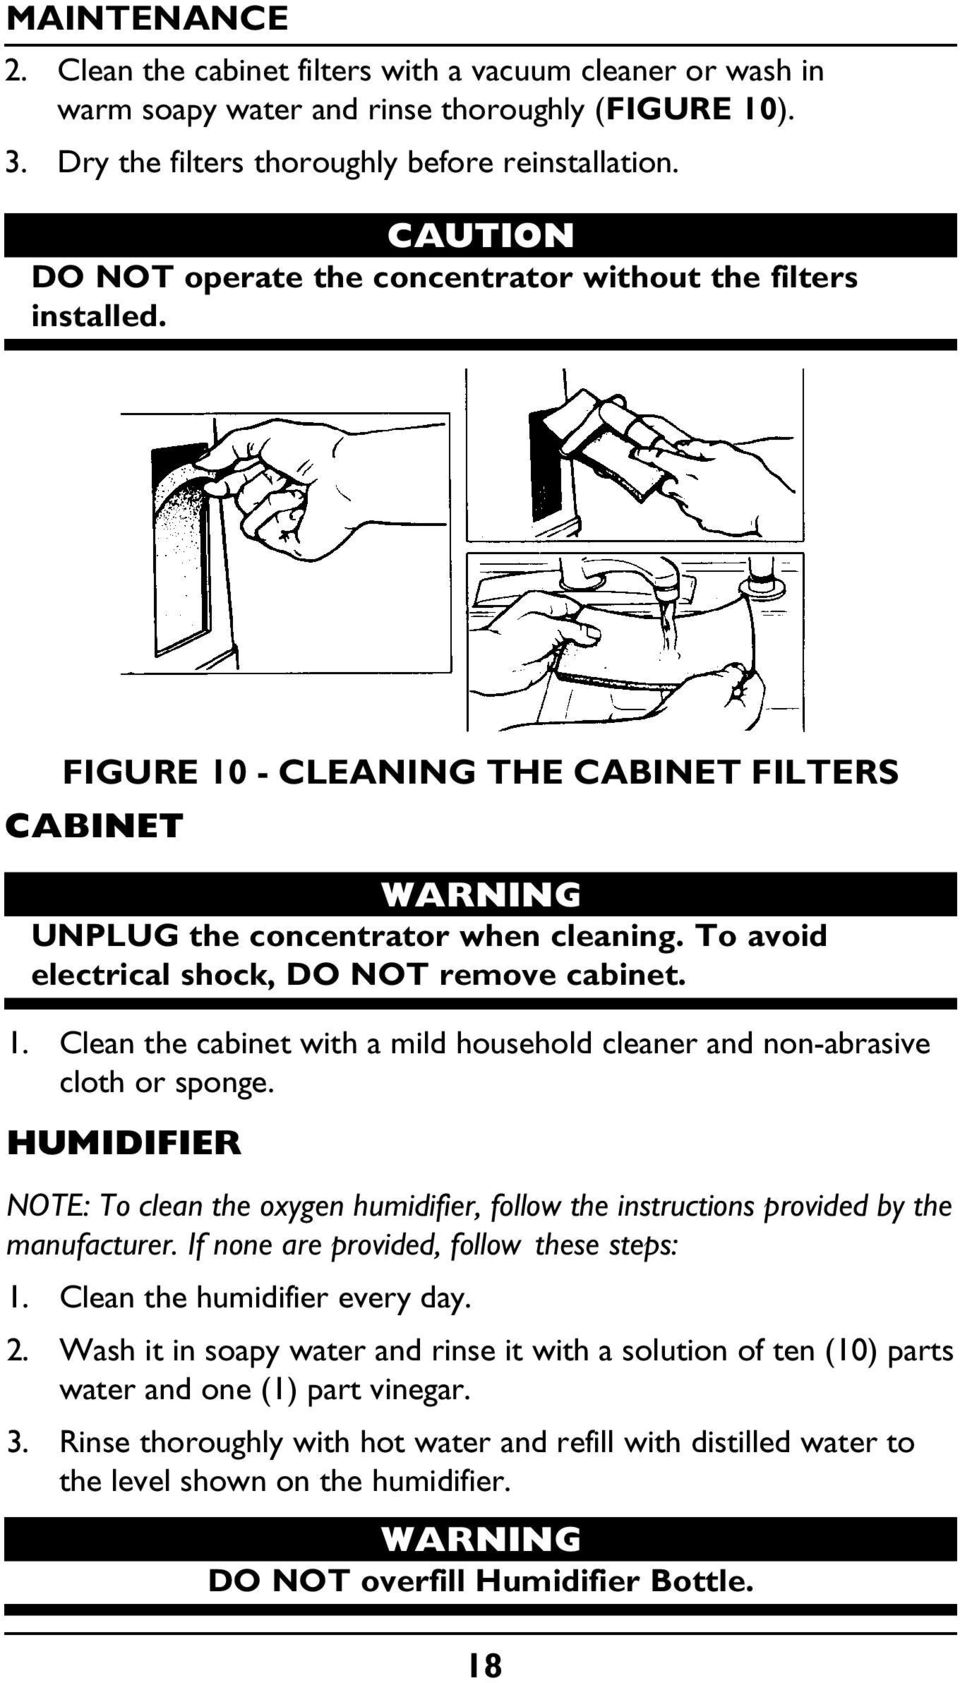 To avoid electrical shock, DO NOT remove cabinet. 1. Clean the cabinet with a mild household cleaner and non-abrasive cloth or sponge.